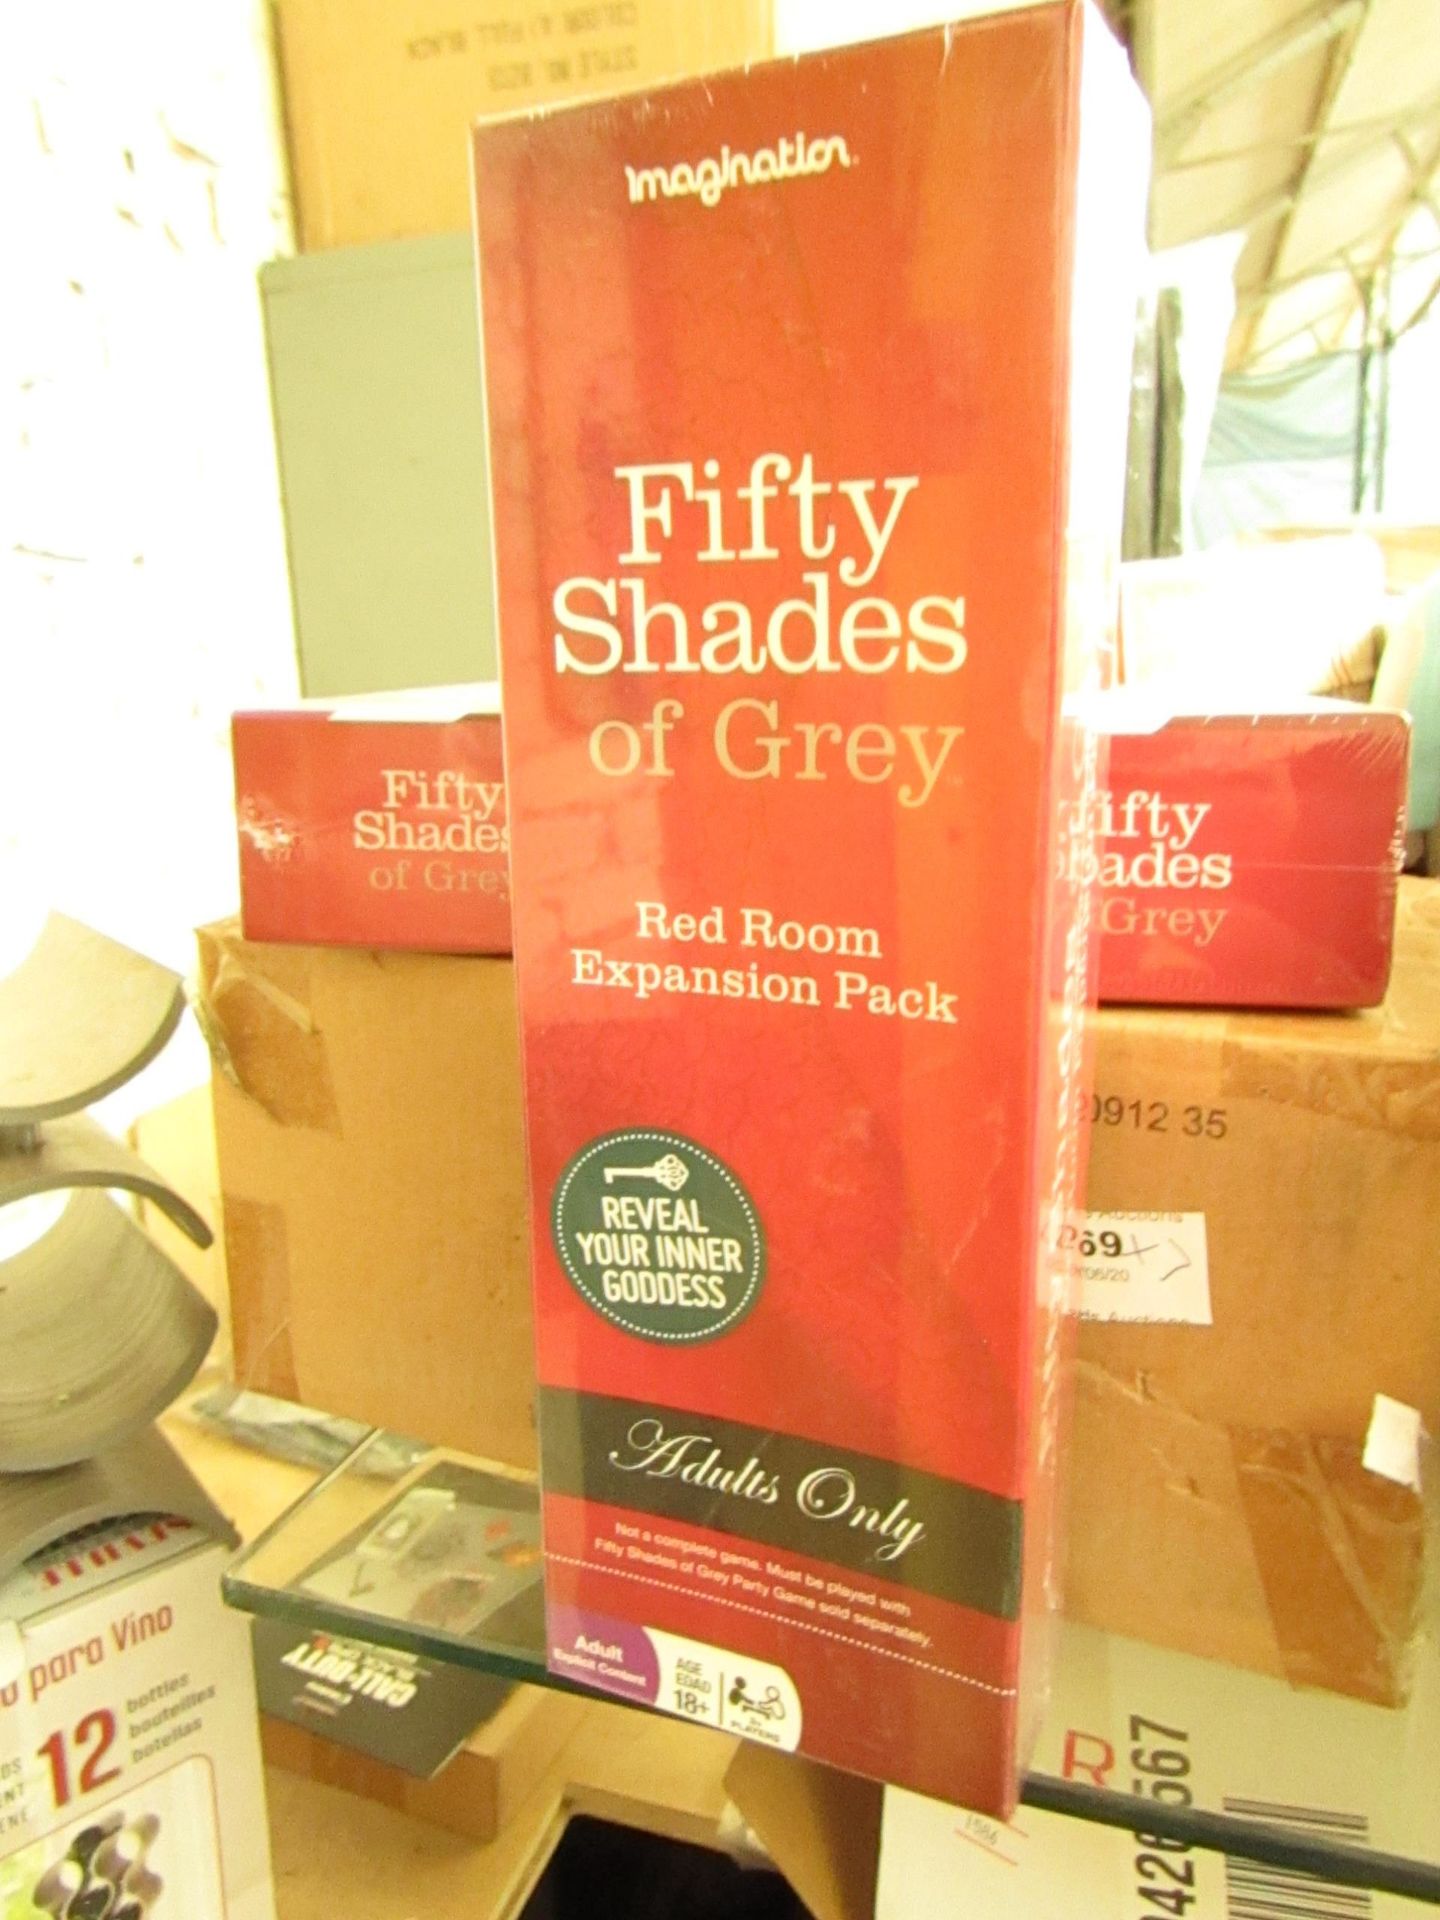 7 x Fifty Shades of Grey Red Room Expansion Packs. New & packaged